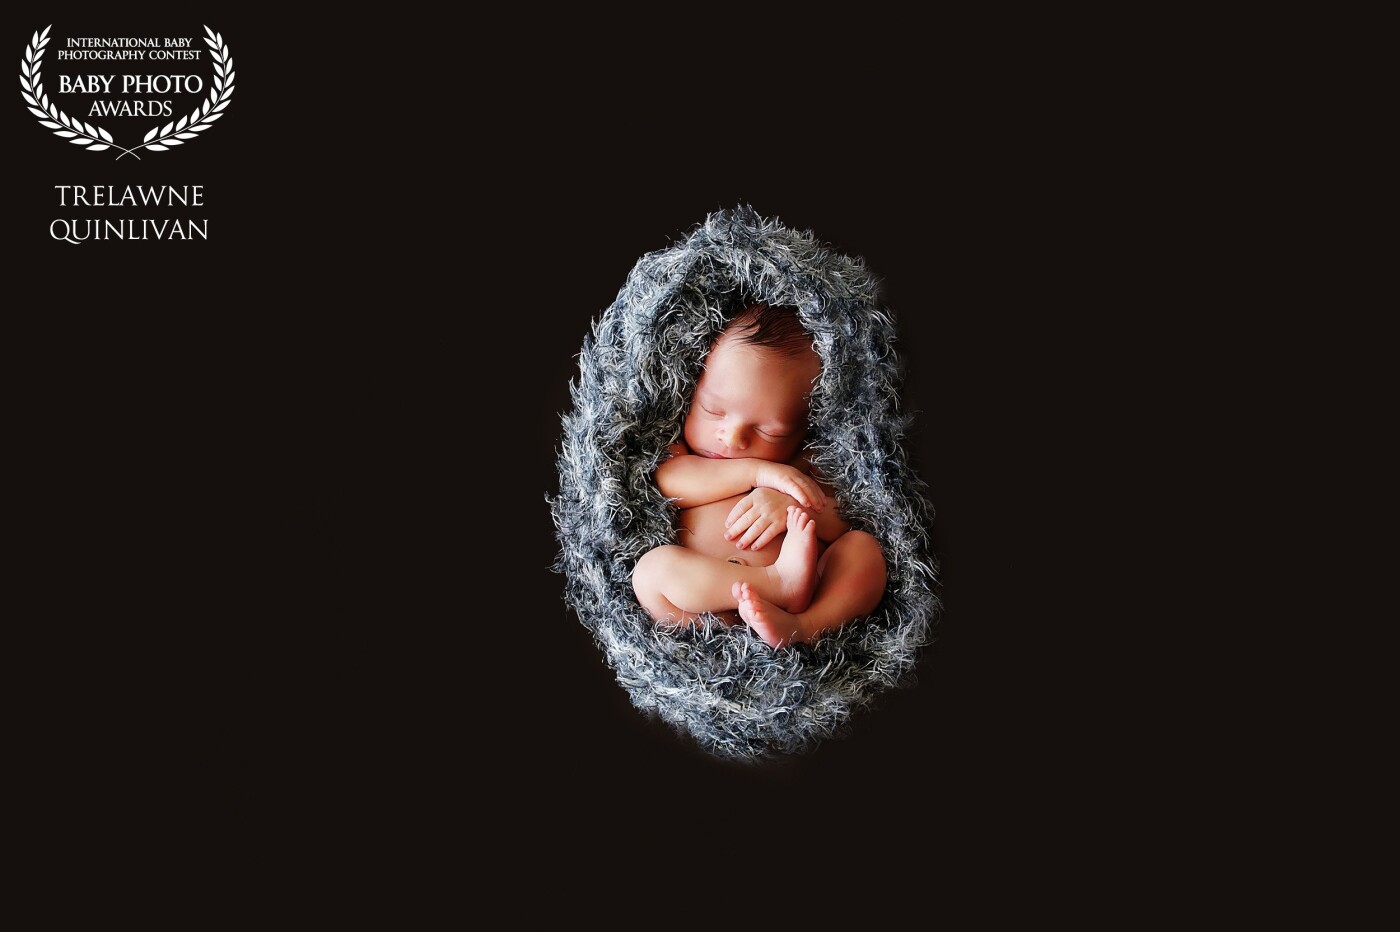 Little Cooper was the perfect subject, he happily slept through the whole shoot which made capturing this image really easy. I love the way the grey wrap follows the shape he makes and cocoons him in.